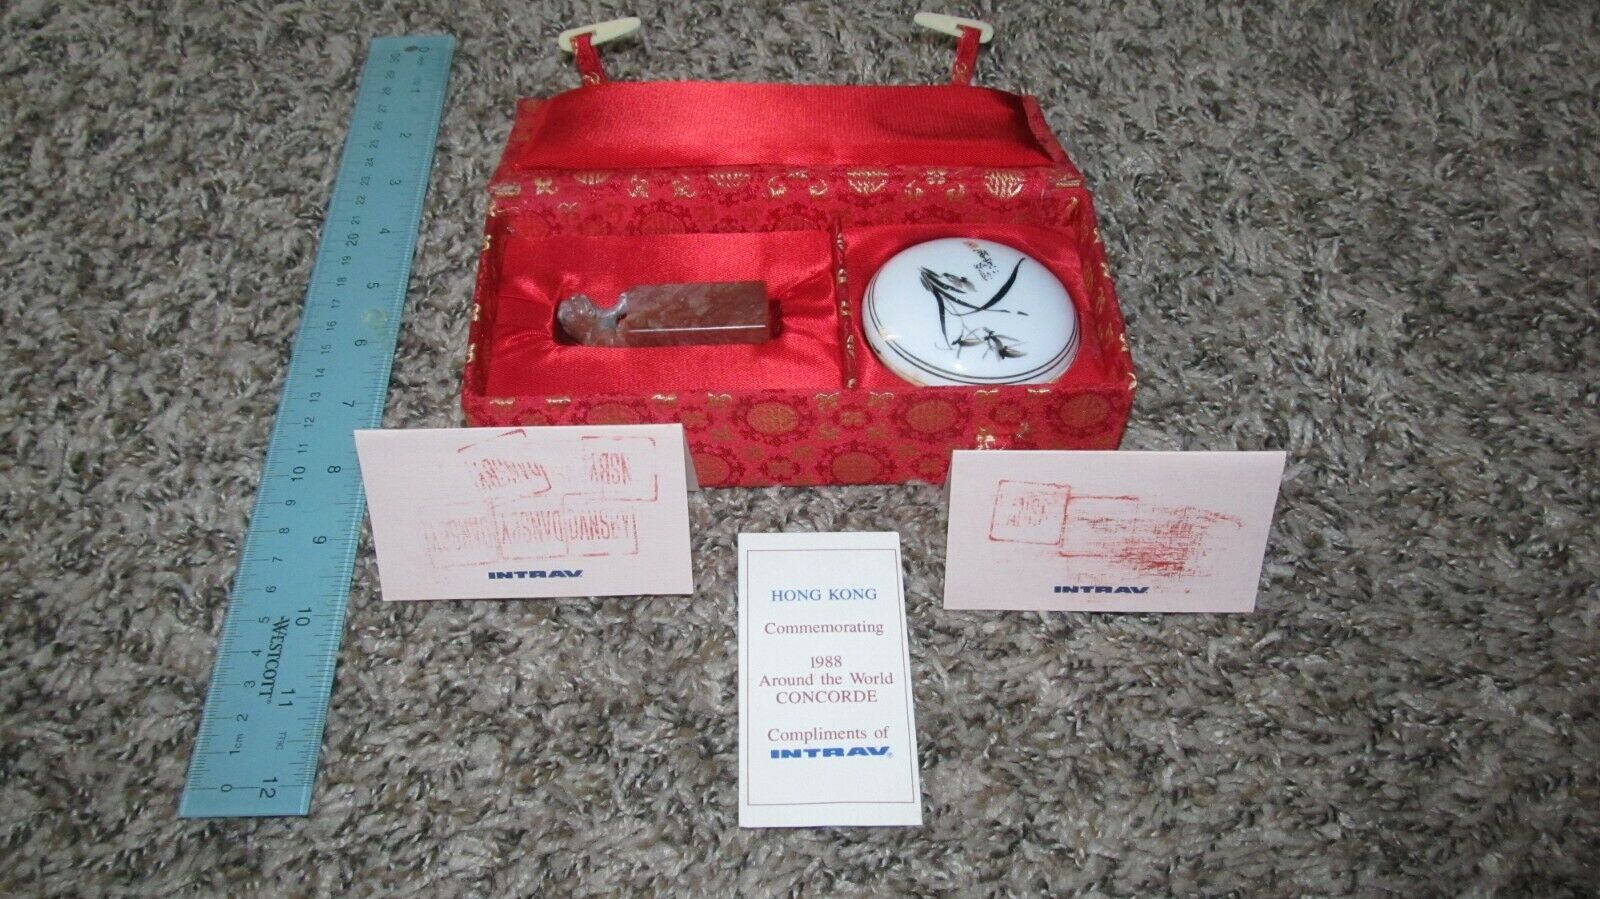 Concorde Intrav 1988 Around The World Hong Kong Gift Set Seal With Wax